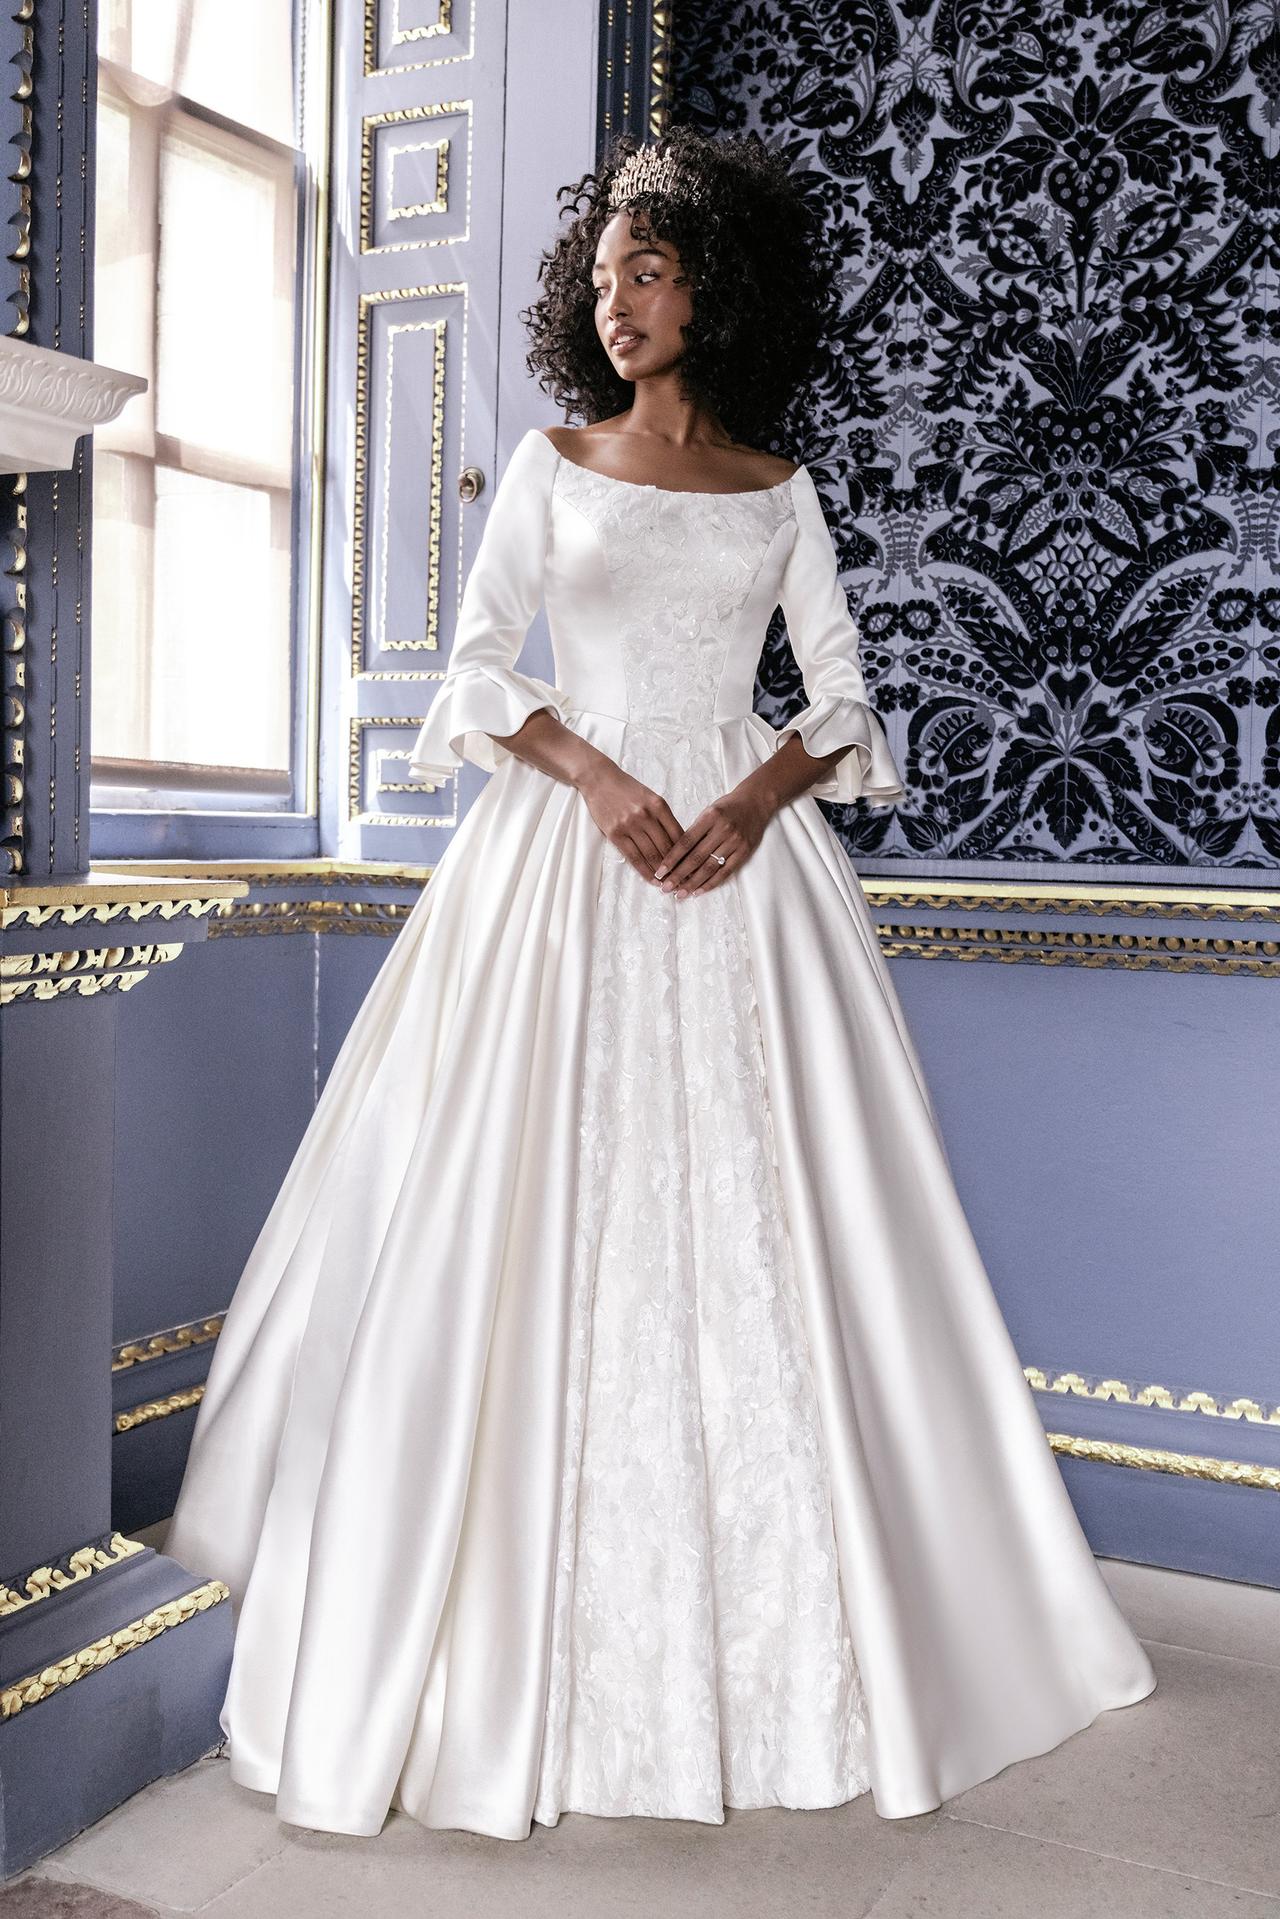 Bridal Dresses Suitable for Large Busts: Tips and Top Picks - EverAfterGuide